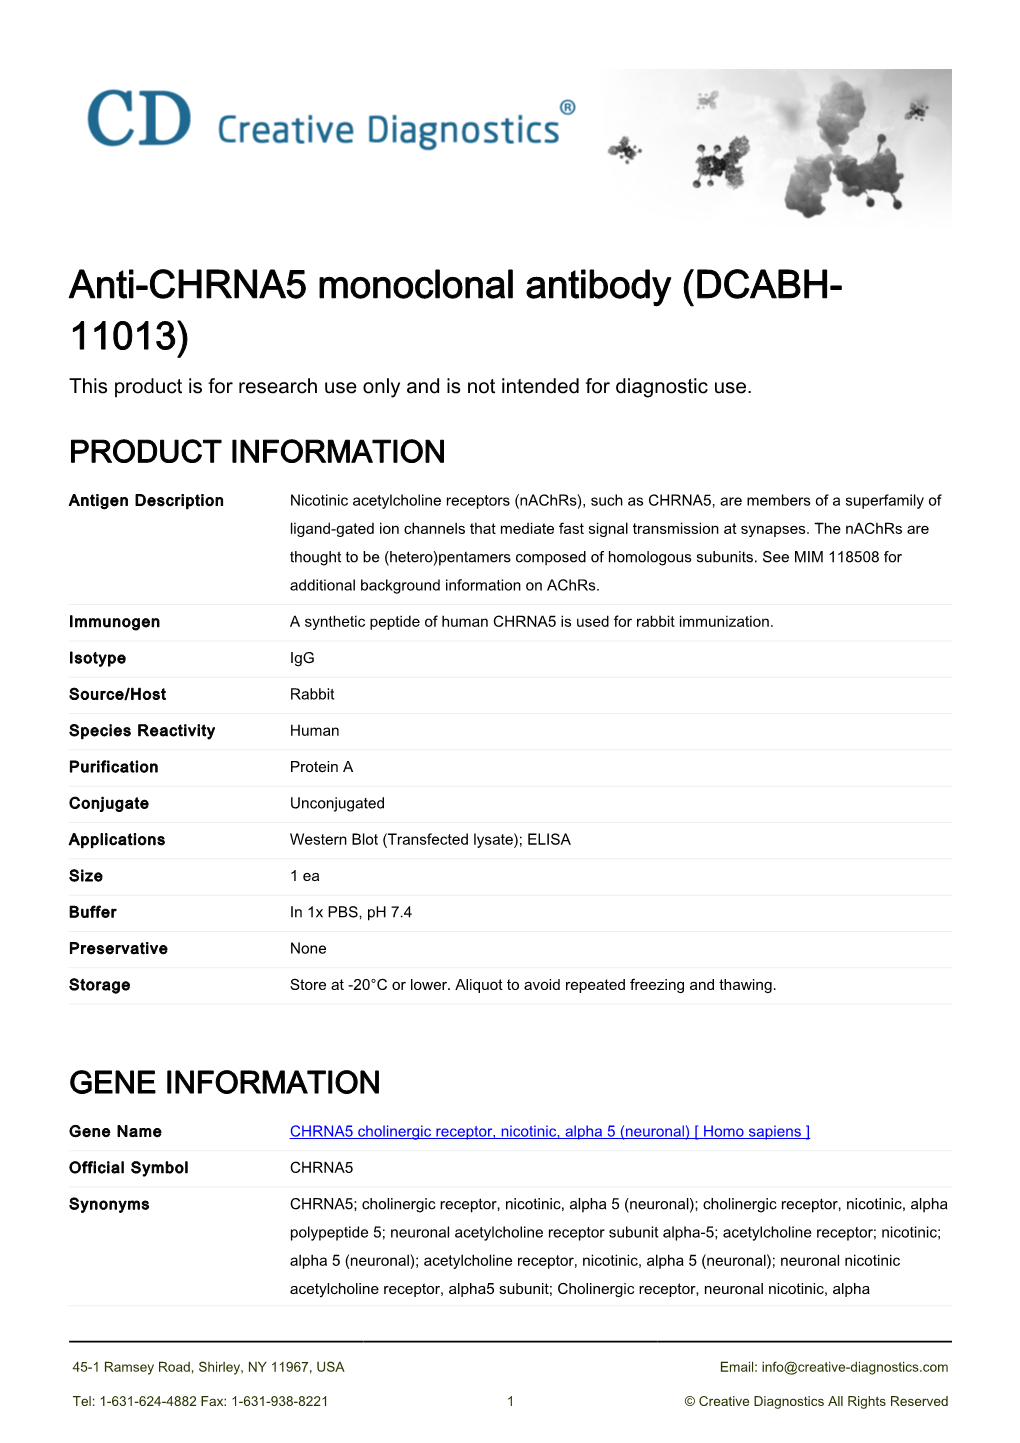 Anti-CHRNA5 Monoclonal Antibody (DCABH- 11013) This Product Is for Research Use Only and Is Not Intended for Diagnostic Use